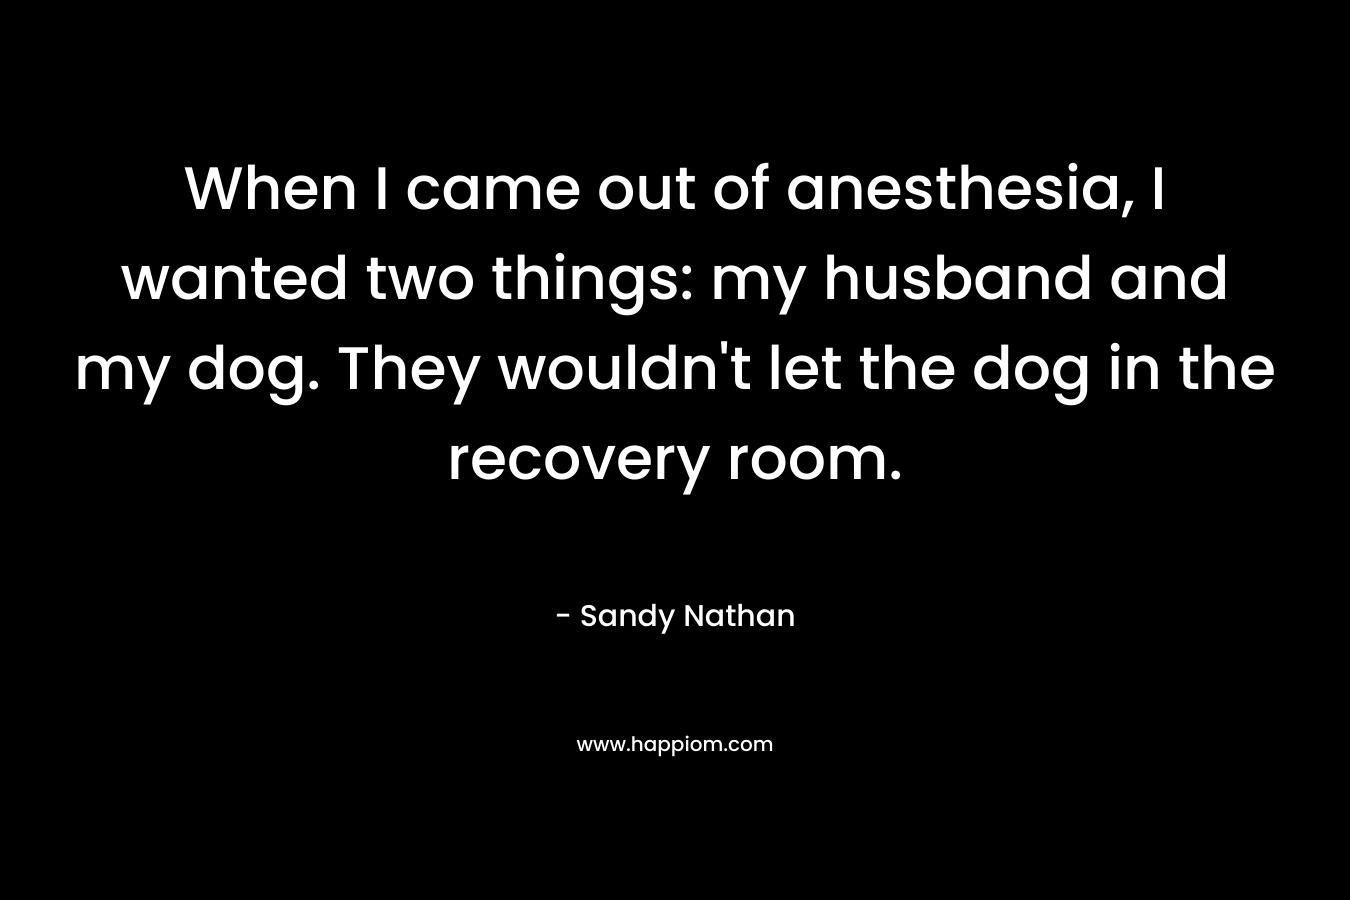 When I came out of anesthesia, I wanted two things: my husband and my dog. They wouldn’t let the dog in the recovery room. – Sandy Nathan